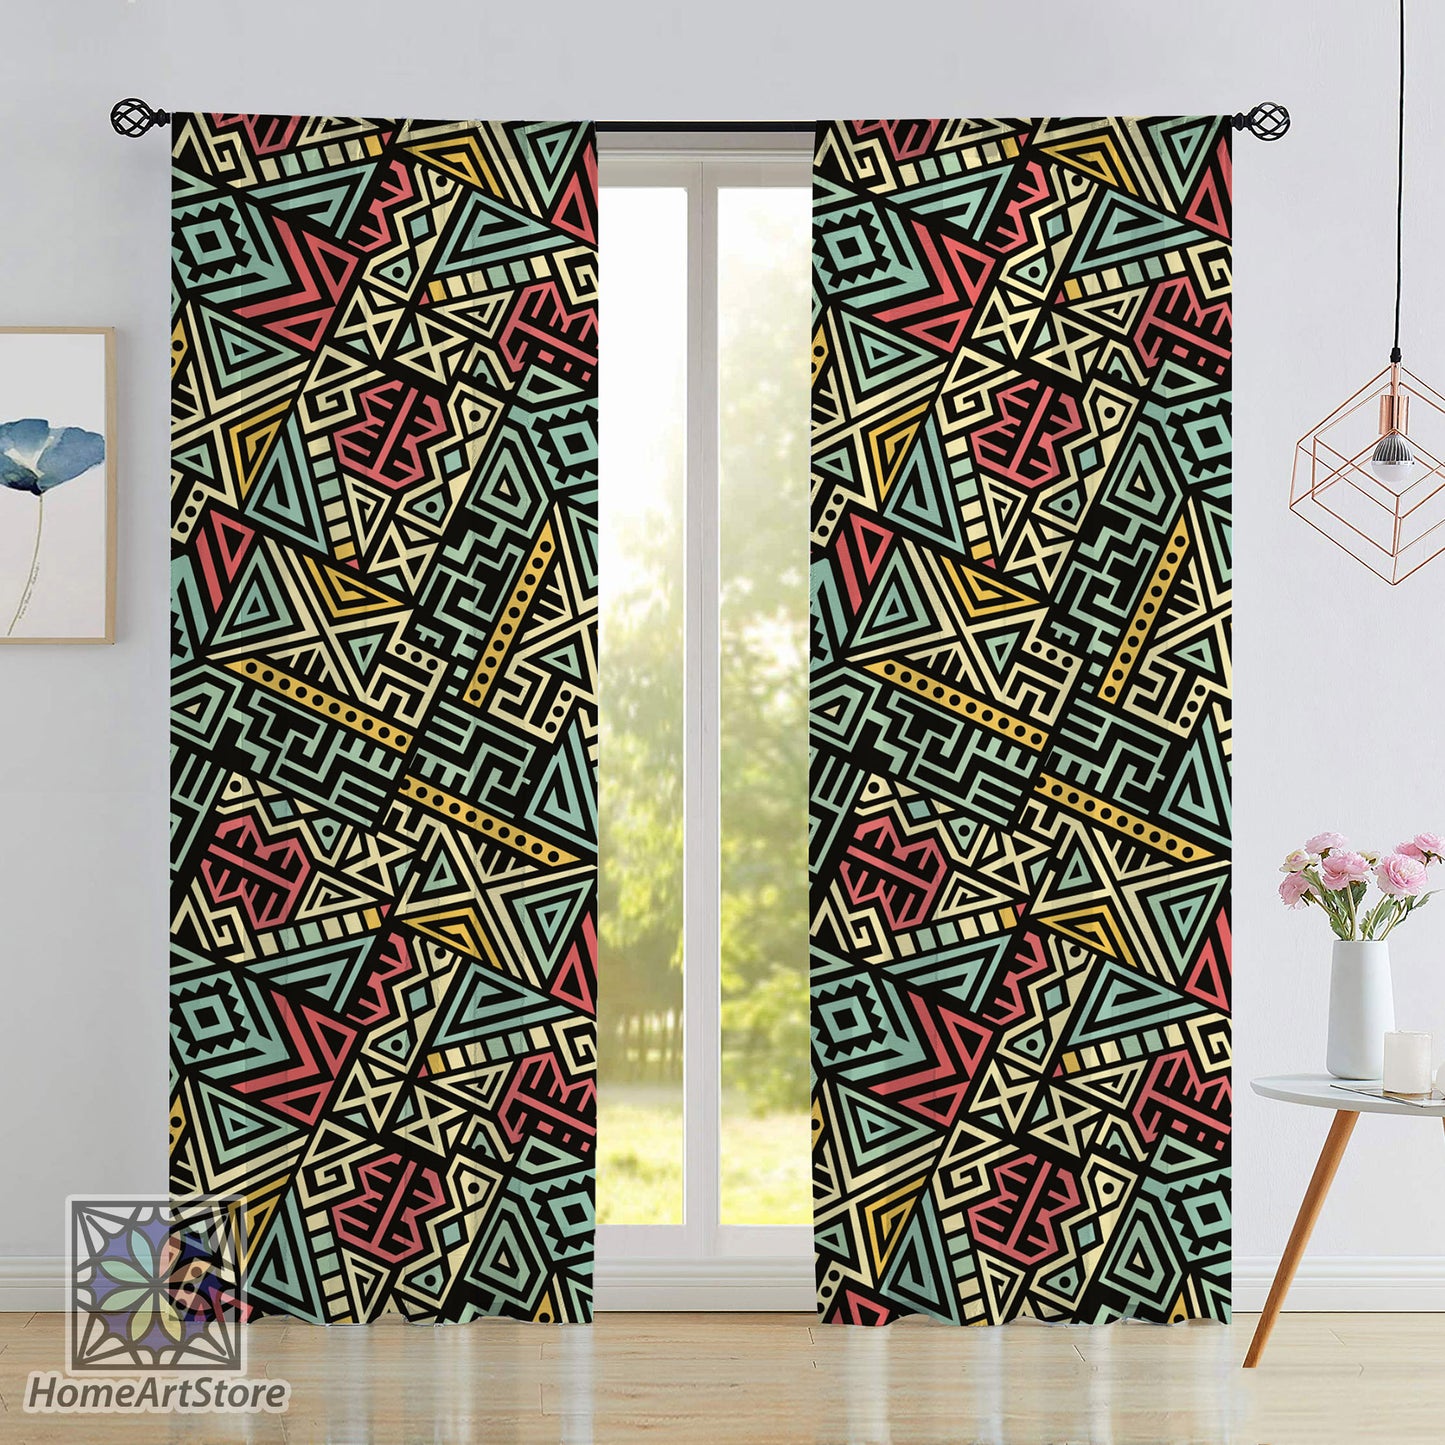 Colorful African Motif Curtain, Aztec Curtain, Patchwork Curtain, Tribal Decor, Living Room Curtain, Traditional Home Decor